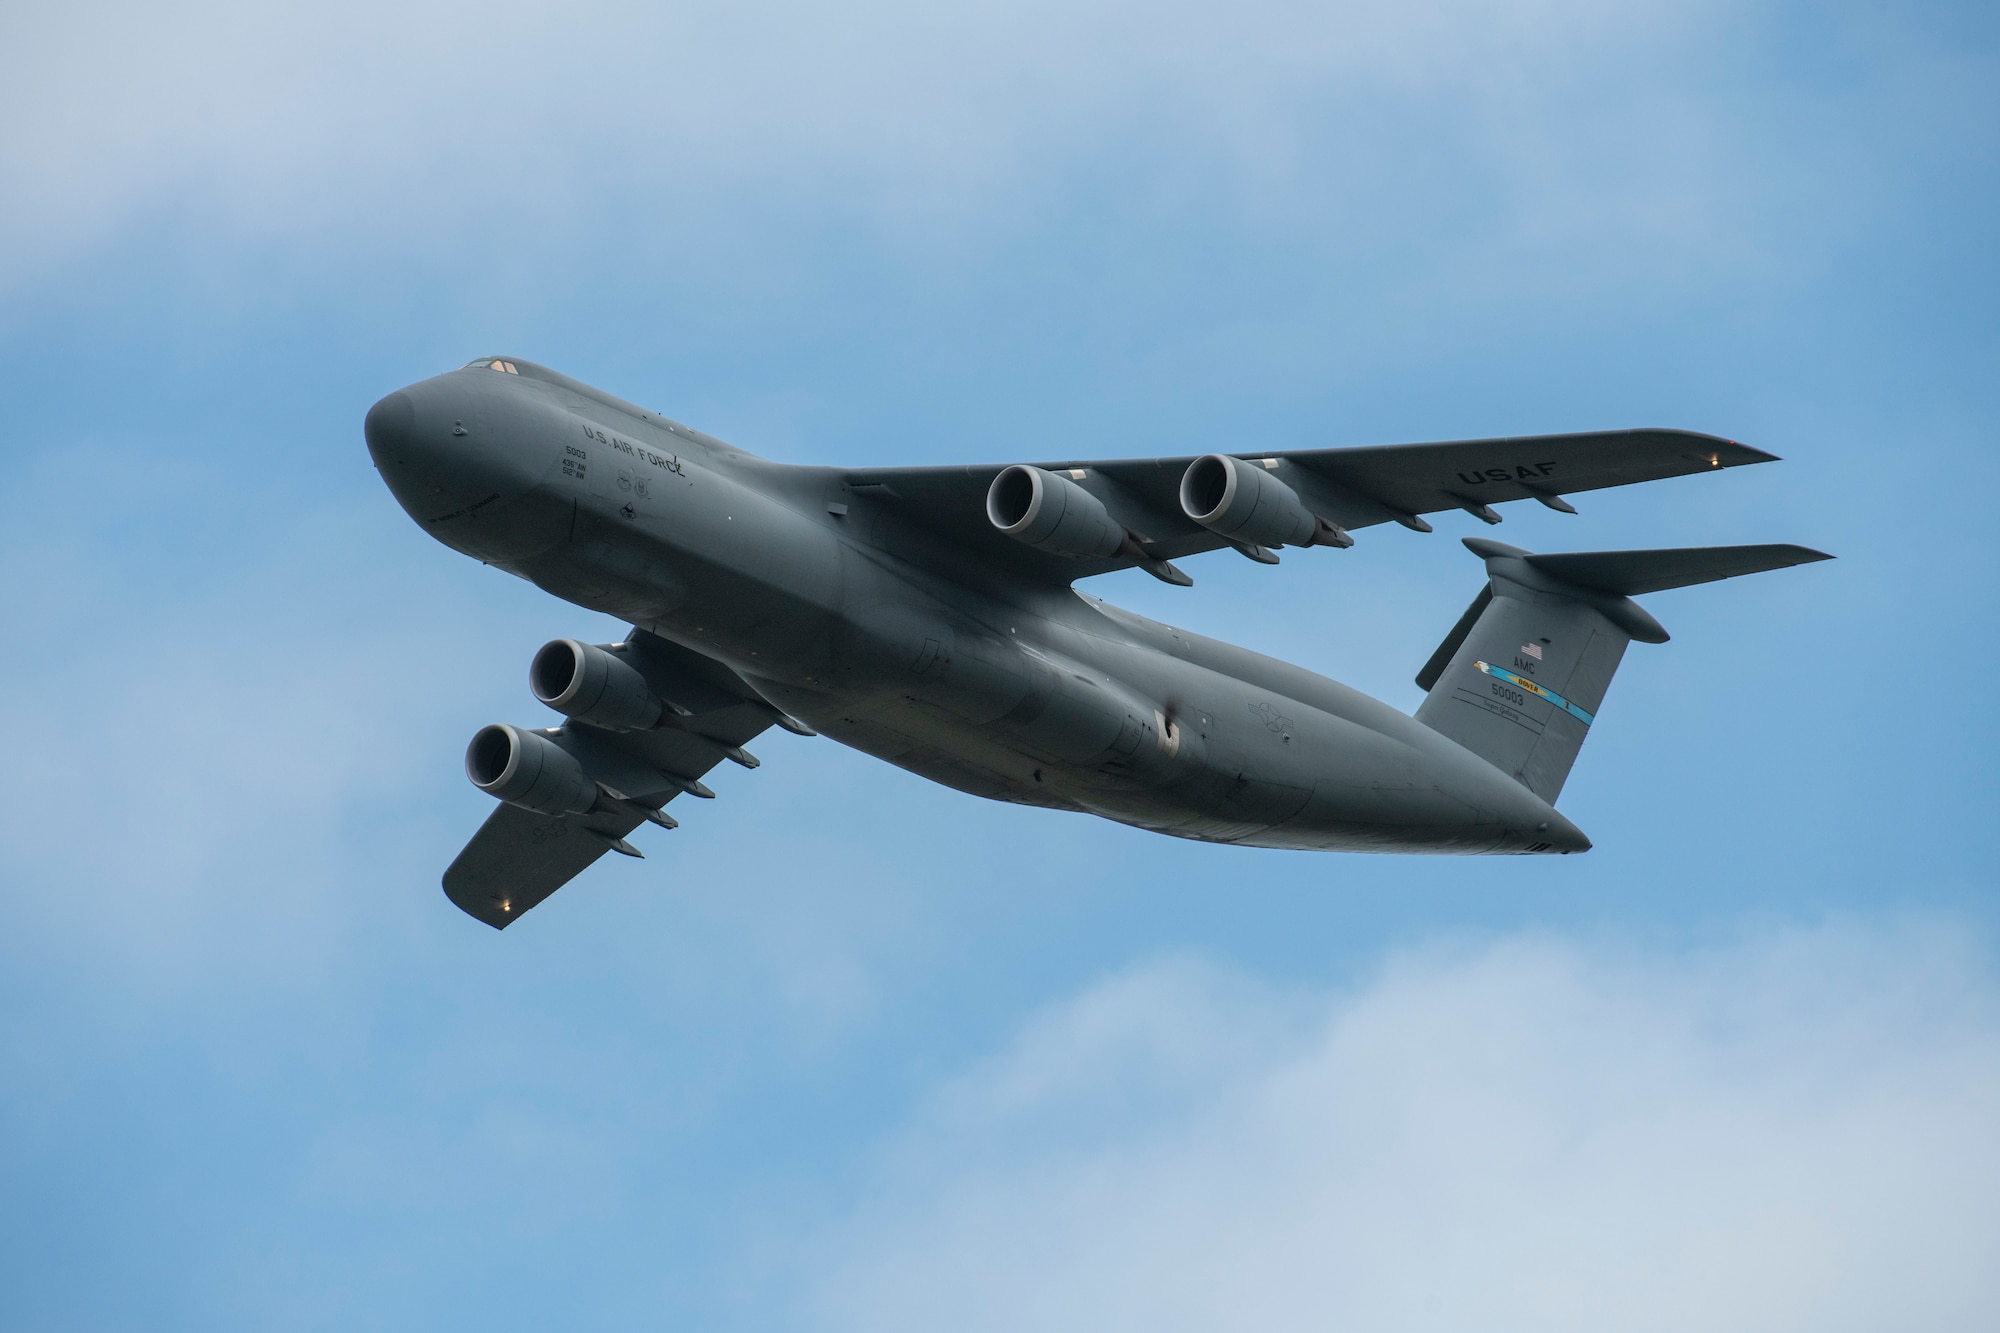 A C-5M Super Galaxy flies over the crowd  during the 2019 Thunder Over Dover Air Show, Sept. 14, 2019, at Dover Air Force Base, Del. The event featured over 20 aircraft static displays, as well as numerous aerial demonstrations. (U.S. Air Force photo by Senior Airman Christopher Quail)